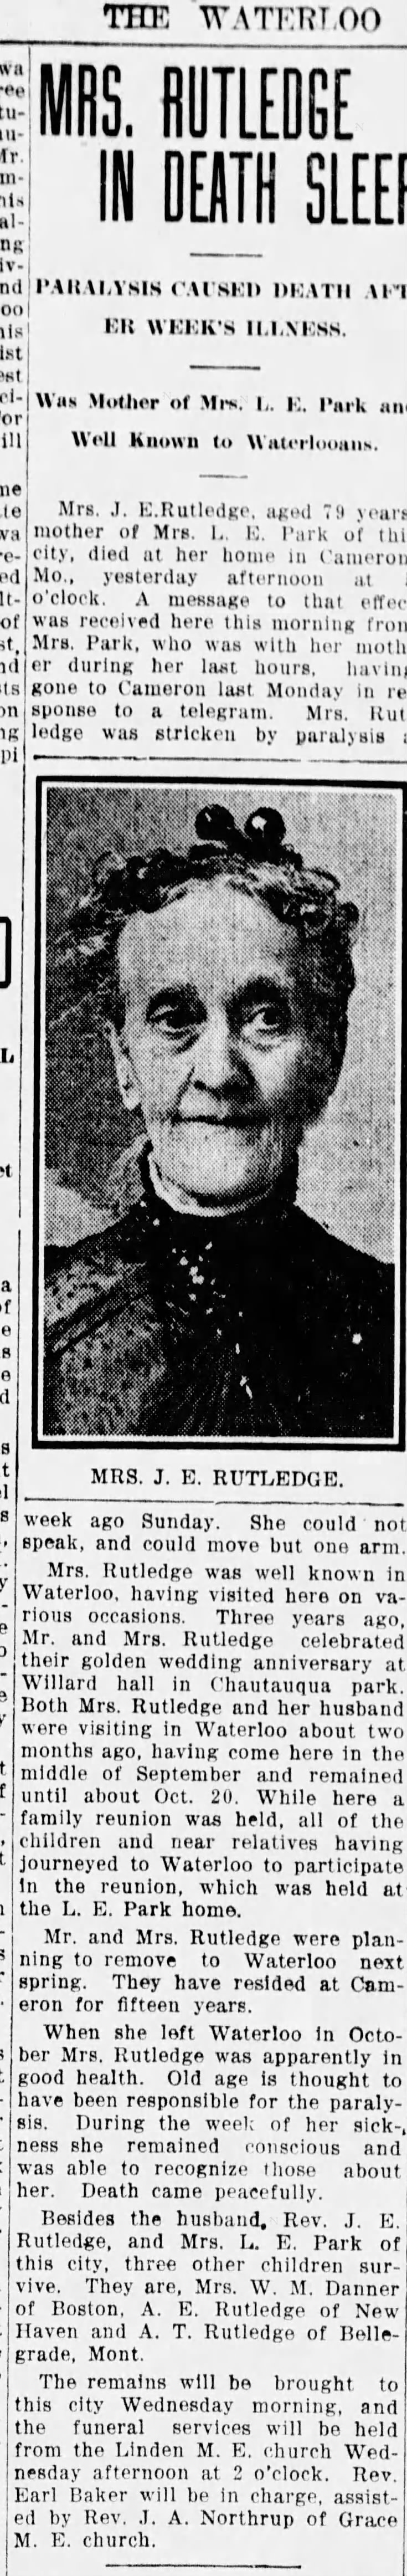 Rutledge, Emma Miller; obit with picture; The Courier; Nov. 24, 1913, Mon. pg 3